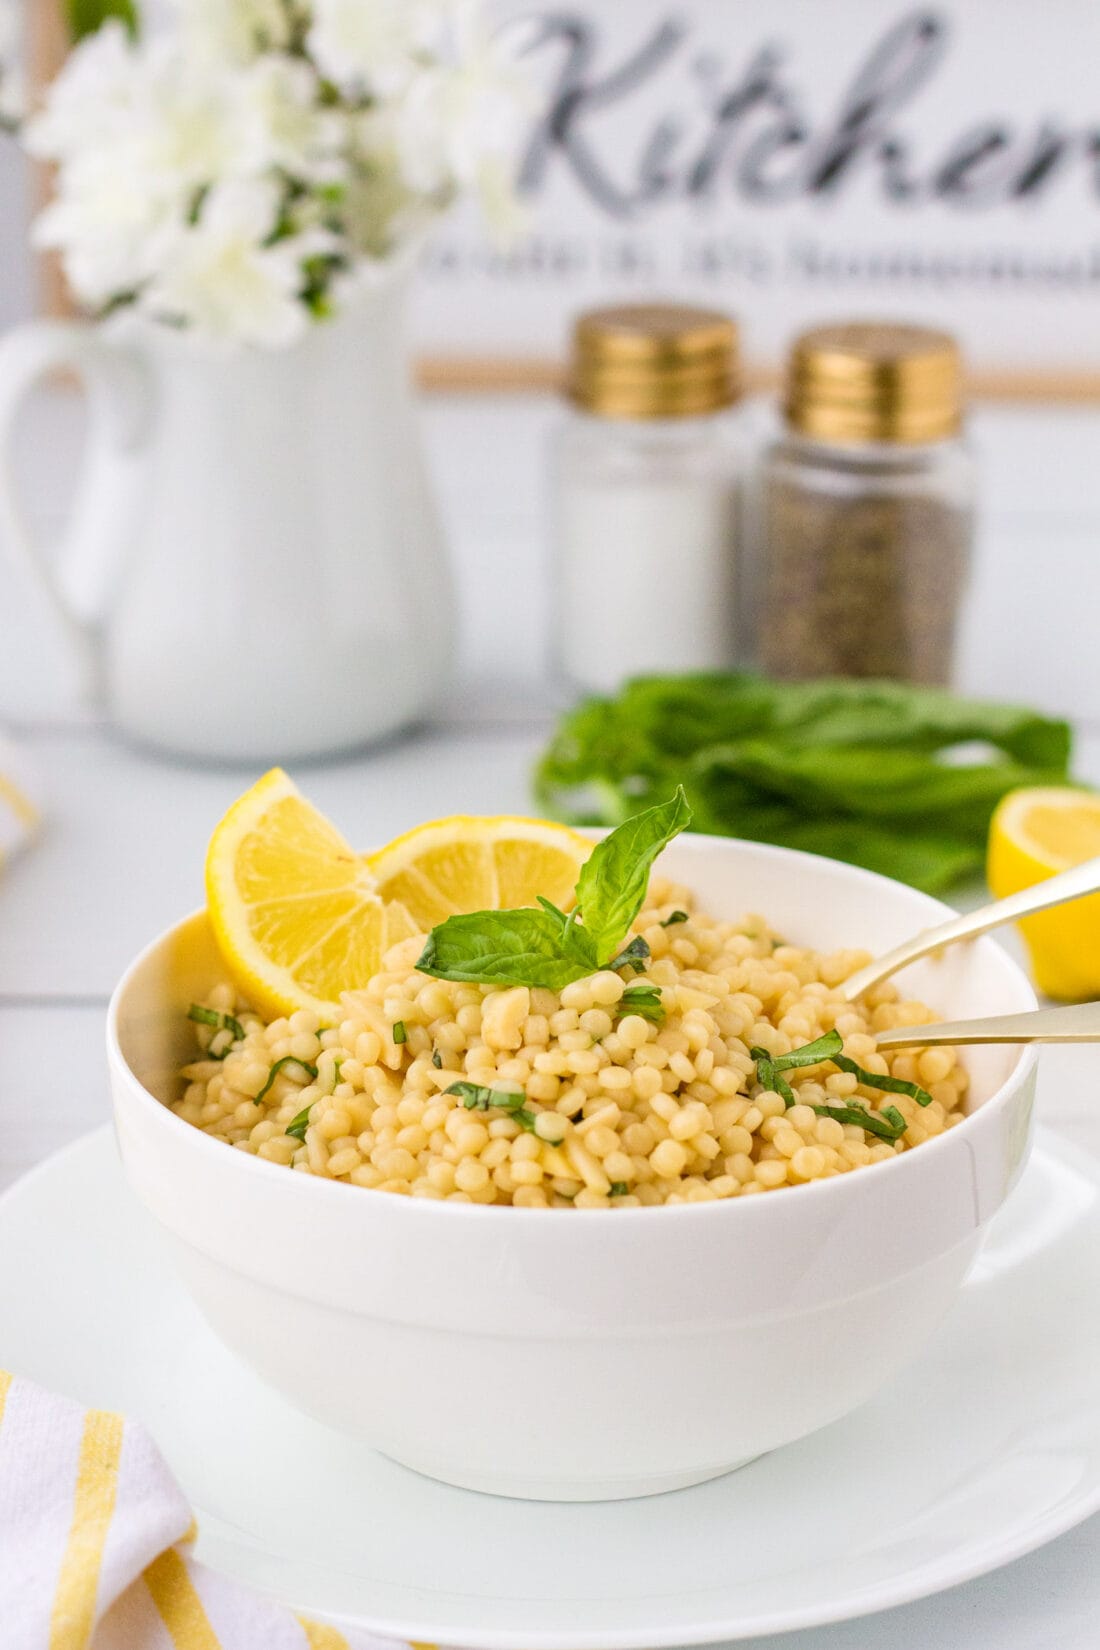 Lemon Couscous with salt and pepper in background